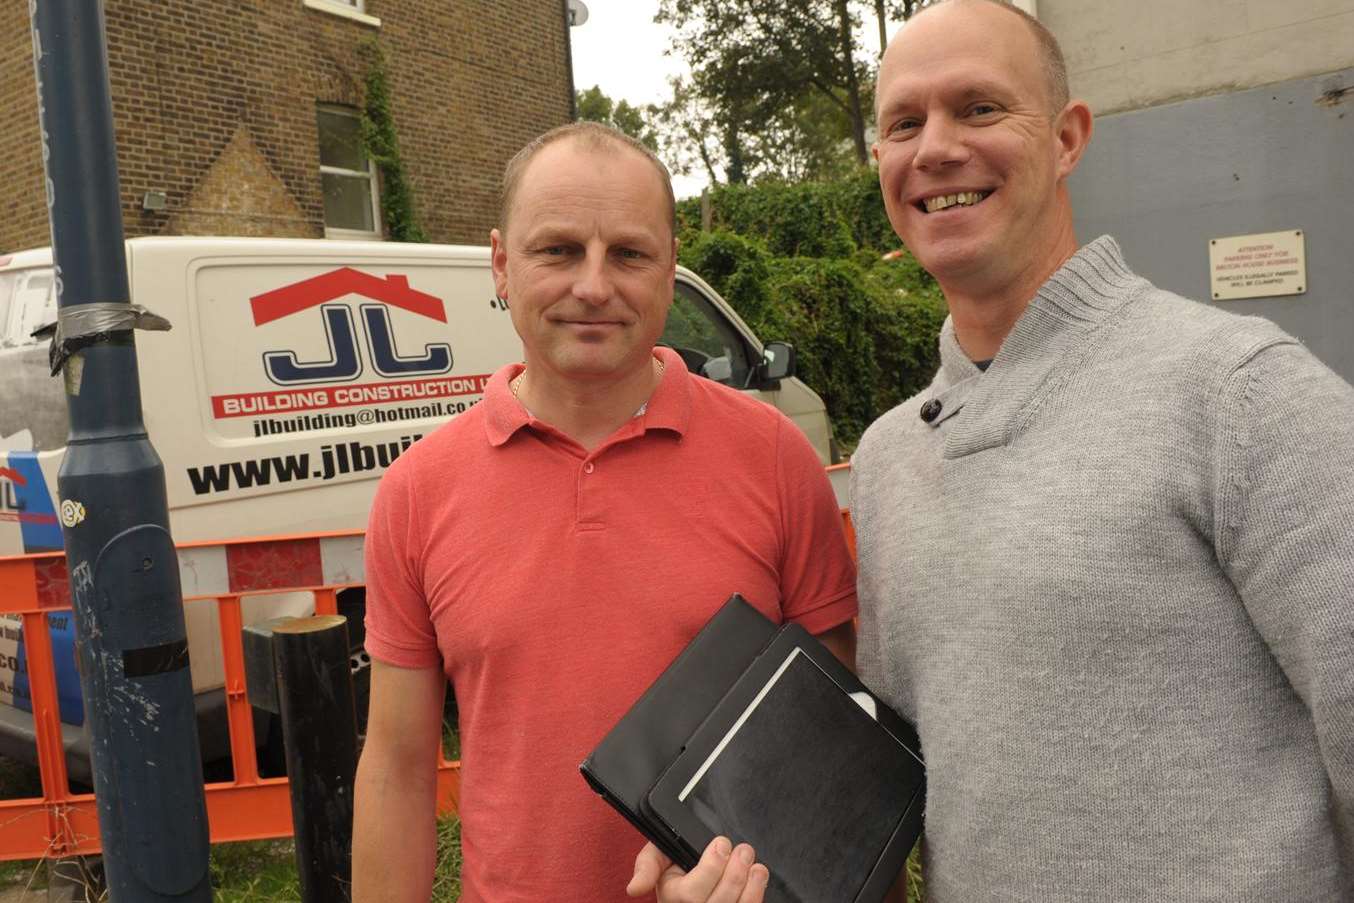 Builder Jarek Luszcz, left, who helped architect David Meaney recover his stolen iPad